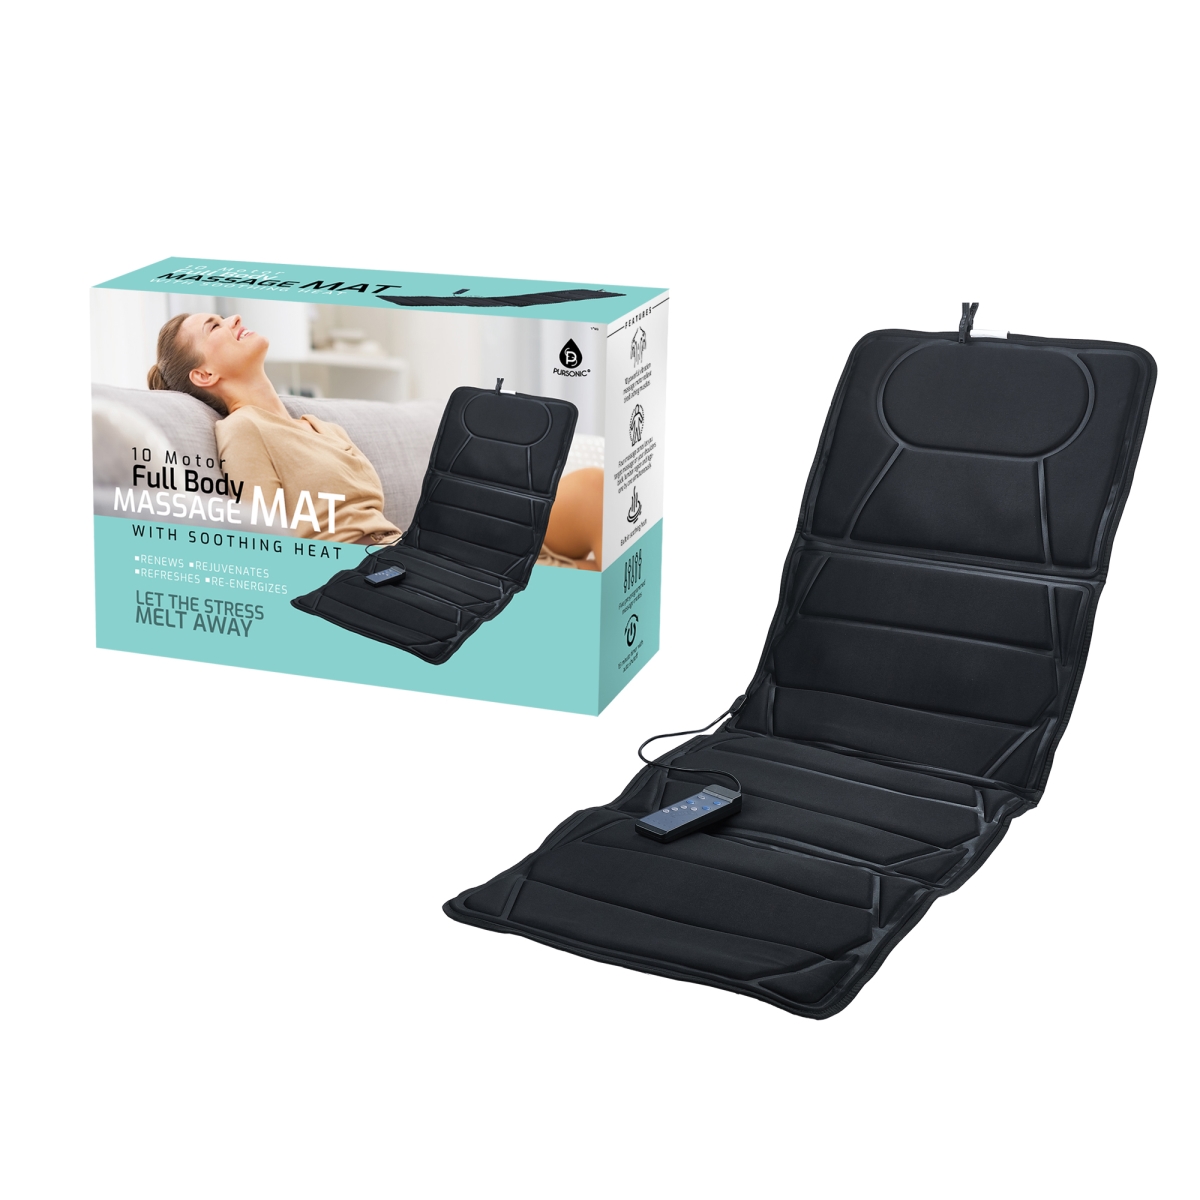 Picture of Pursonic HMG1500 1.5 x 23.2 x 69.3 in. Luxury Full Body Heated Massage Mat with Soothing Heat